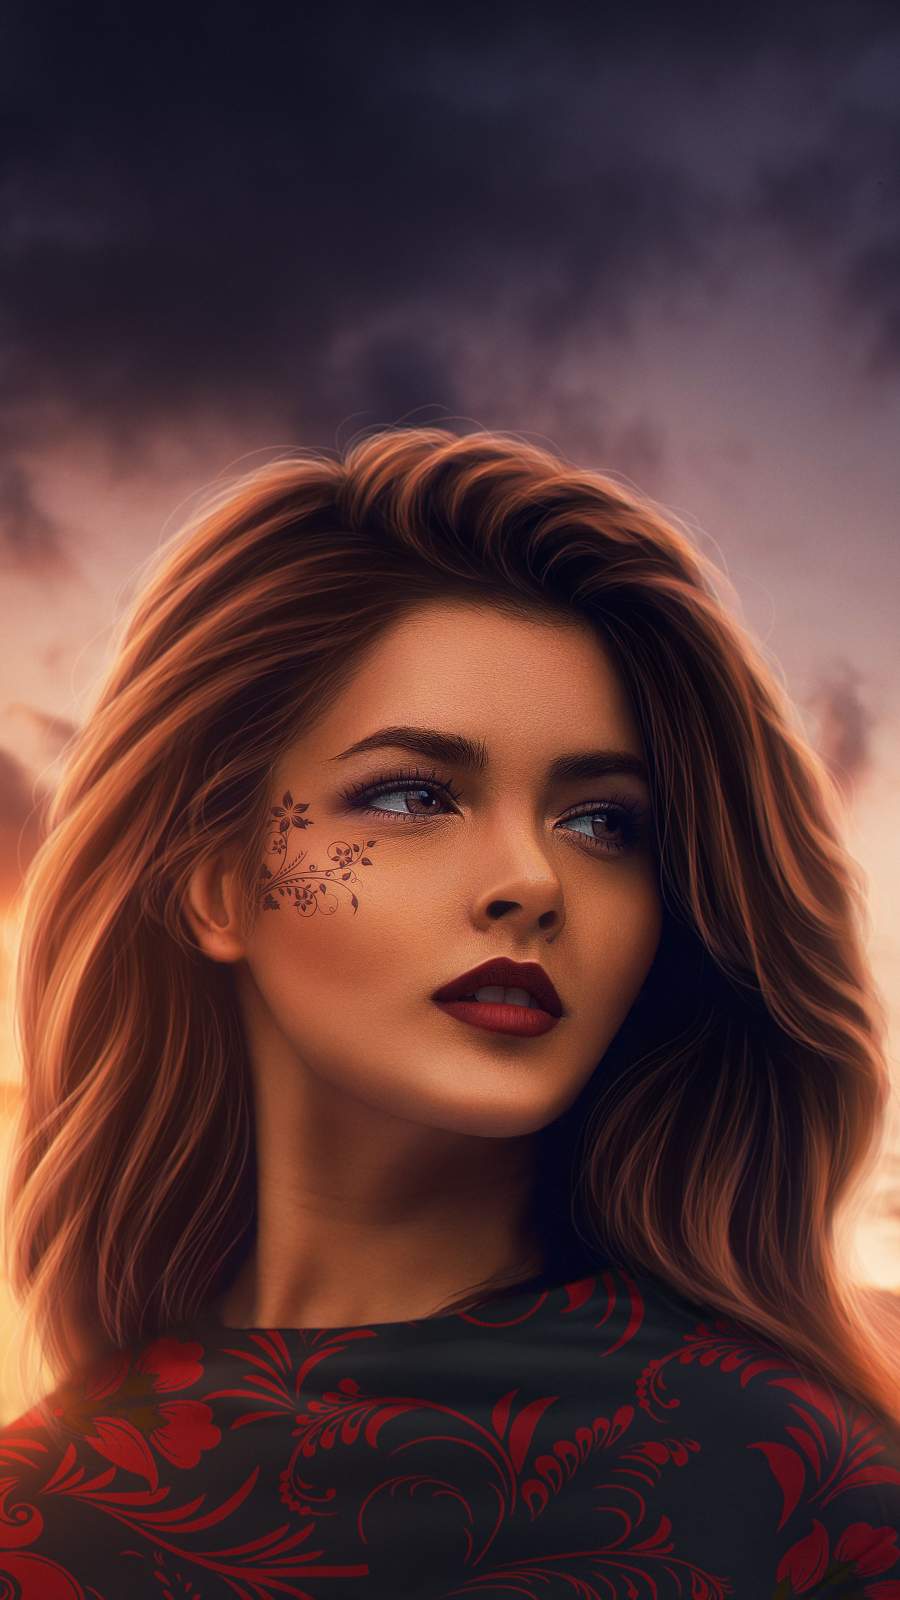 Girls For Iphone Wallpapers